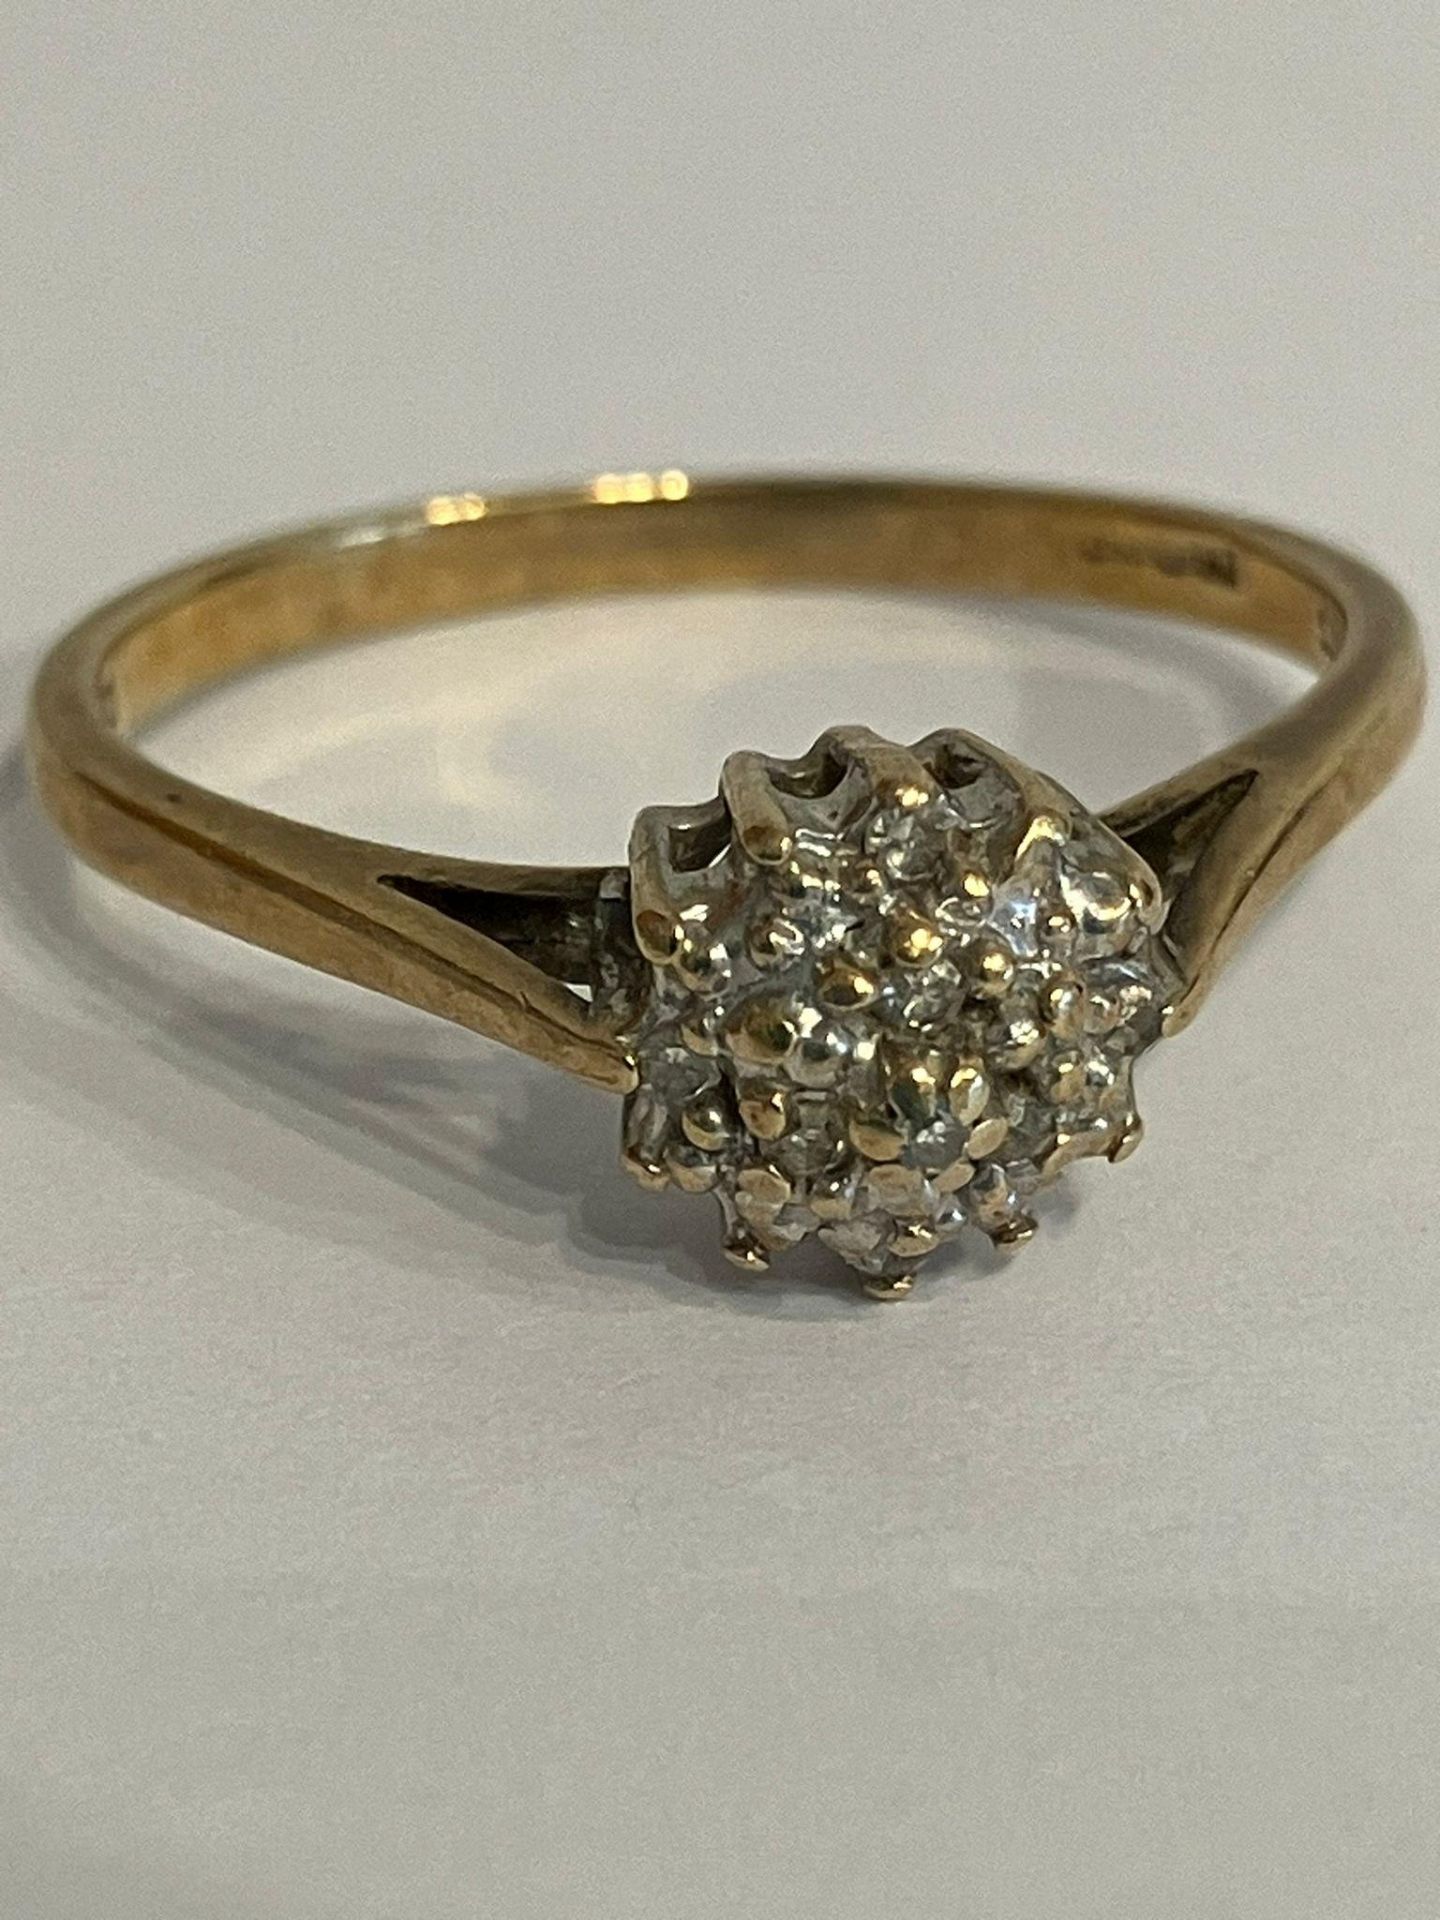 9 carat YELLOW GOLD and DIAMOND CLUSTER RING. Complete with ring box. Full UK hallmark.1.85 grams.